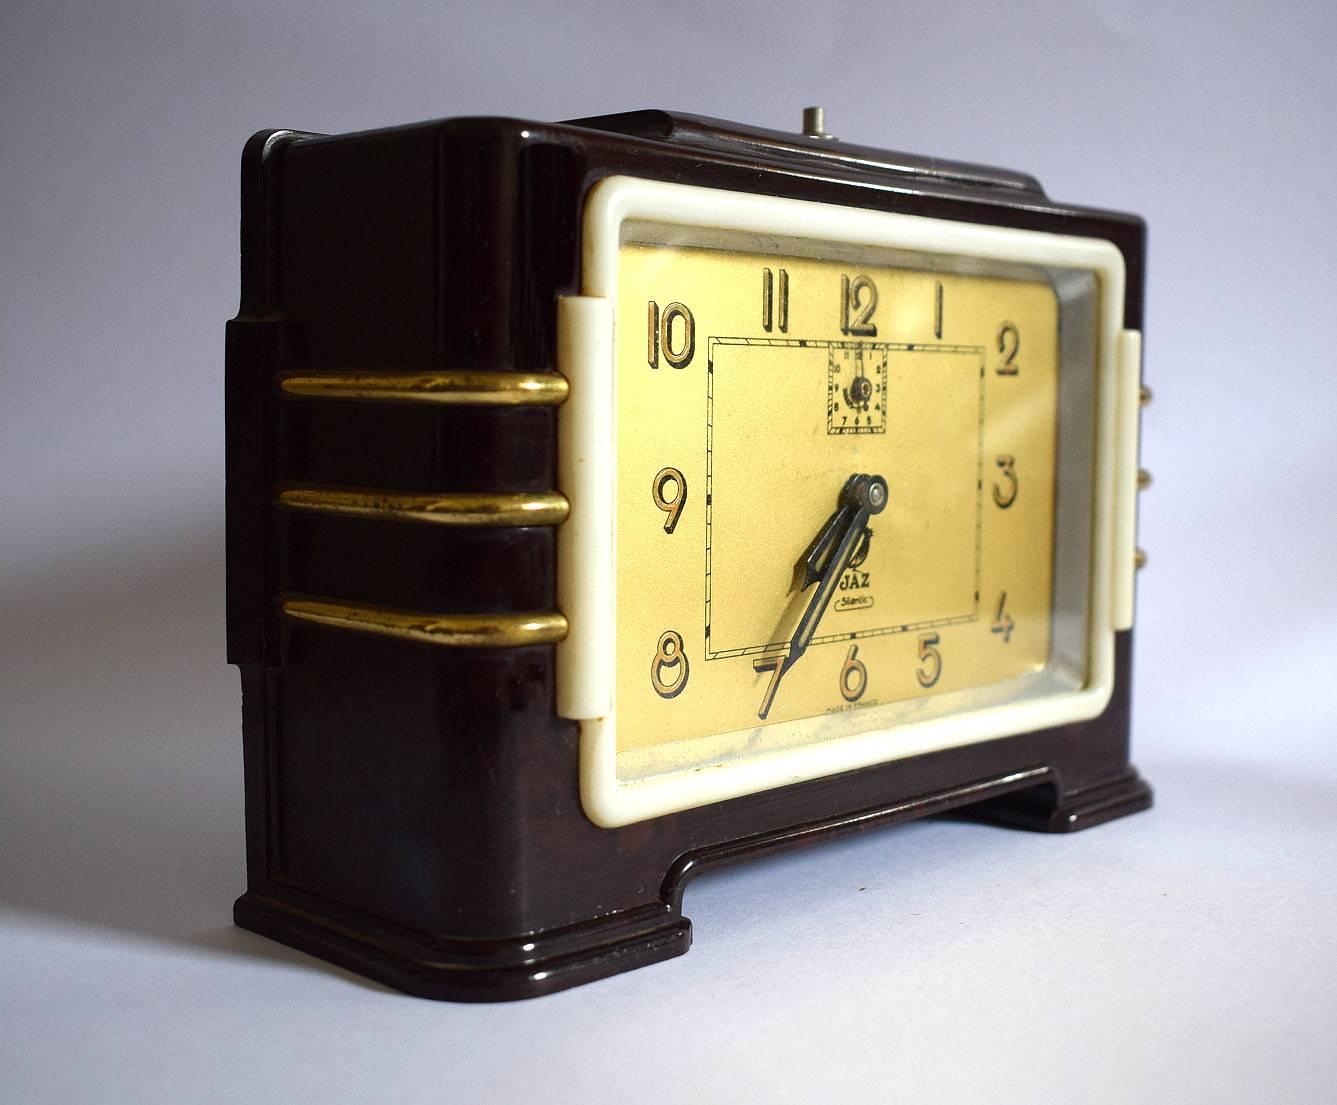 Very attractive and totally authentic 1930's, Art Deco French bakelite clock by Jaz. Condition is very good, there are no chips or discoloration to the bakelite. It keeps very good time having been professionally serviced recently. We haven’t tried